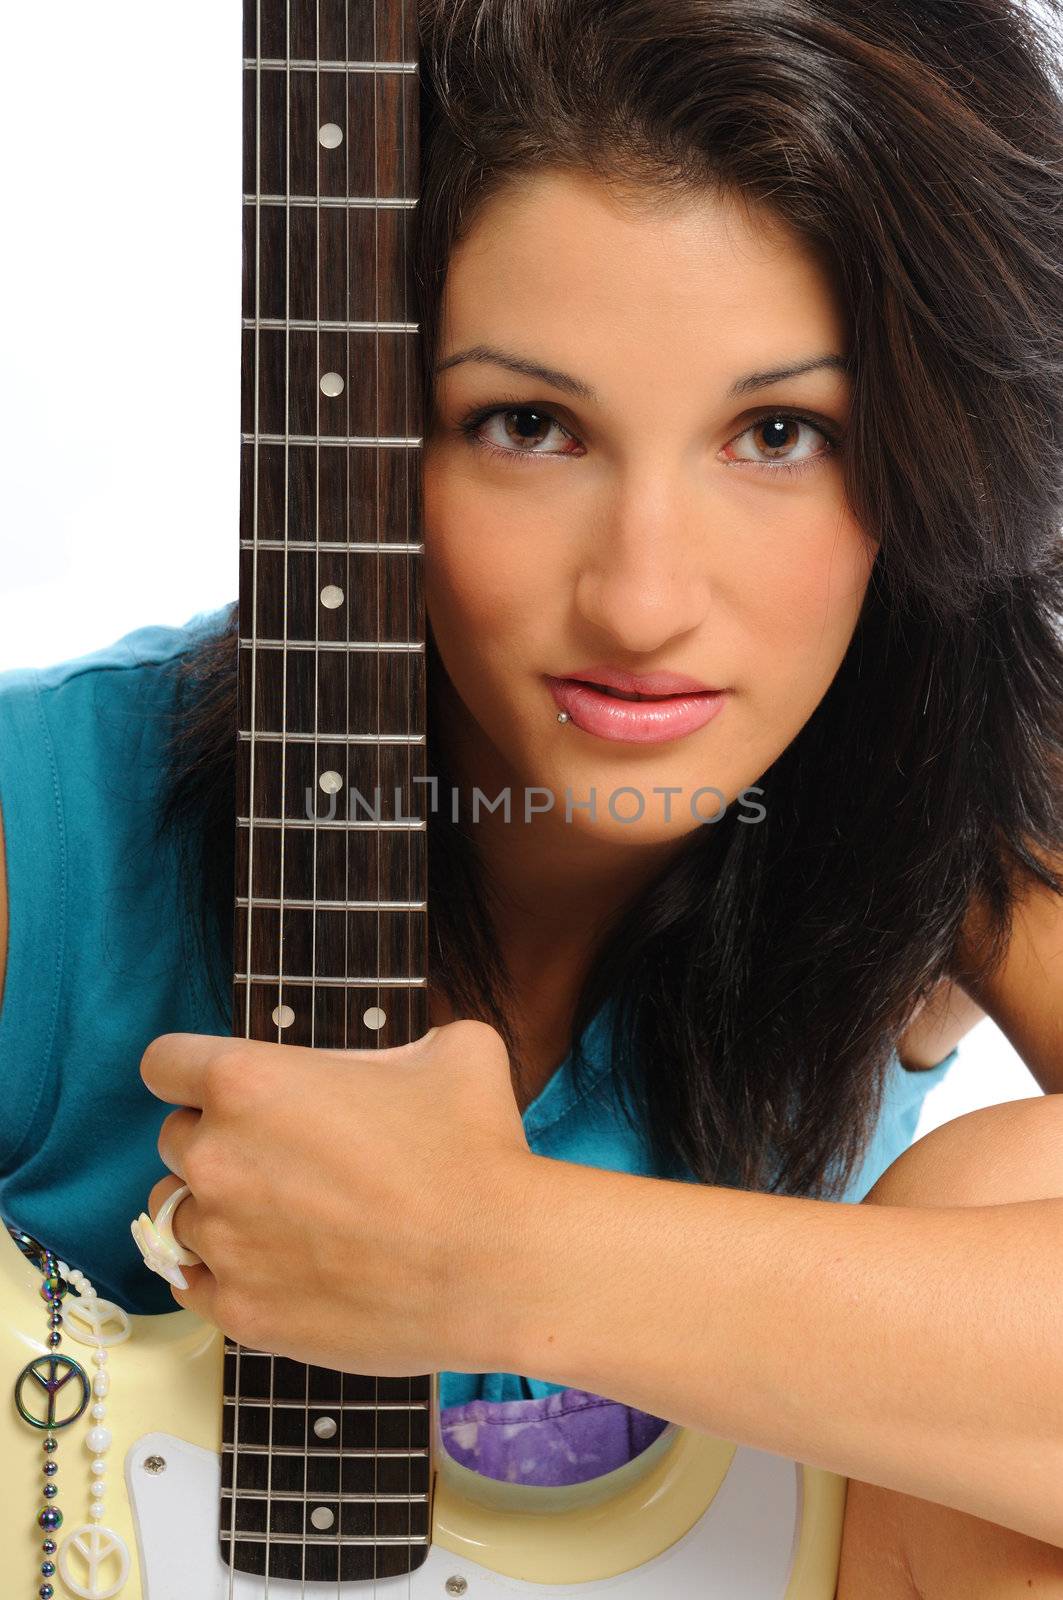 guitar holding beauty by PDImages